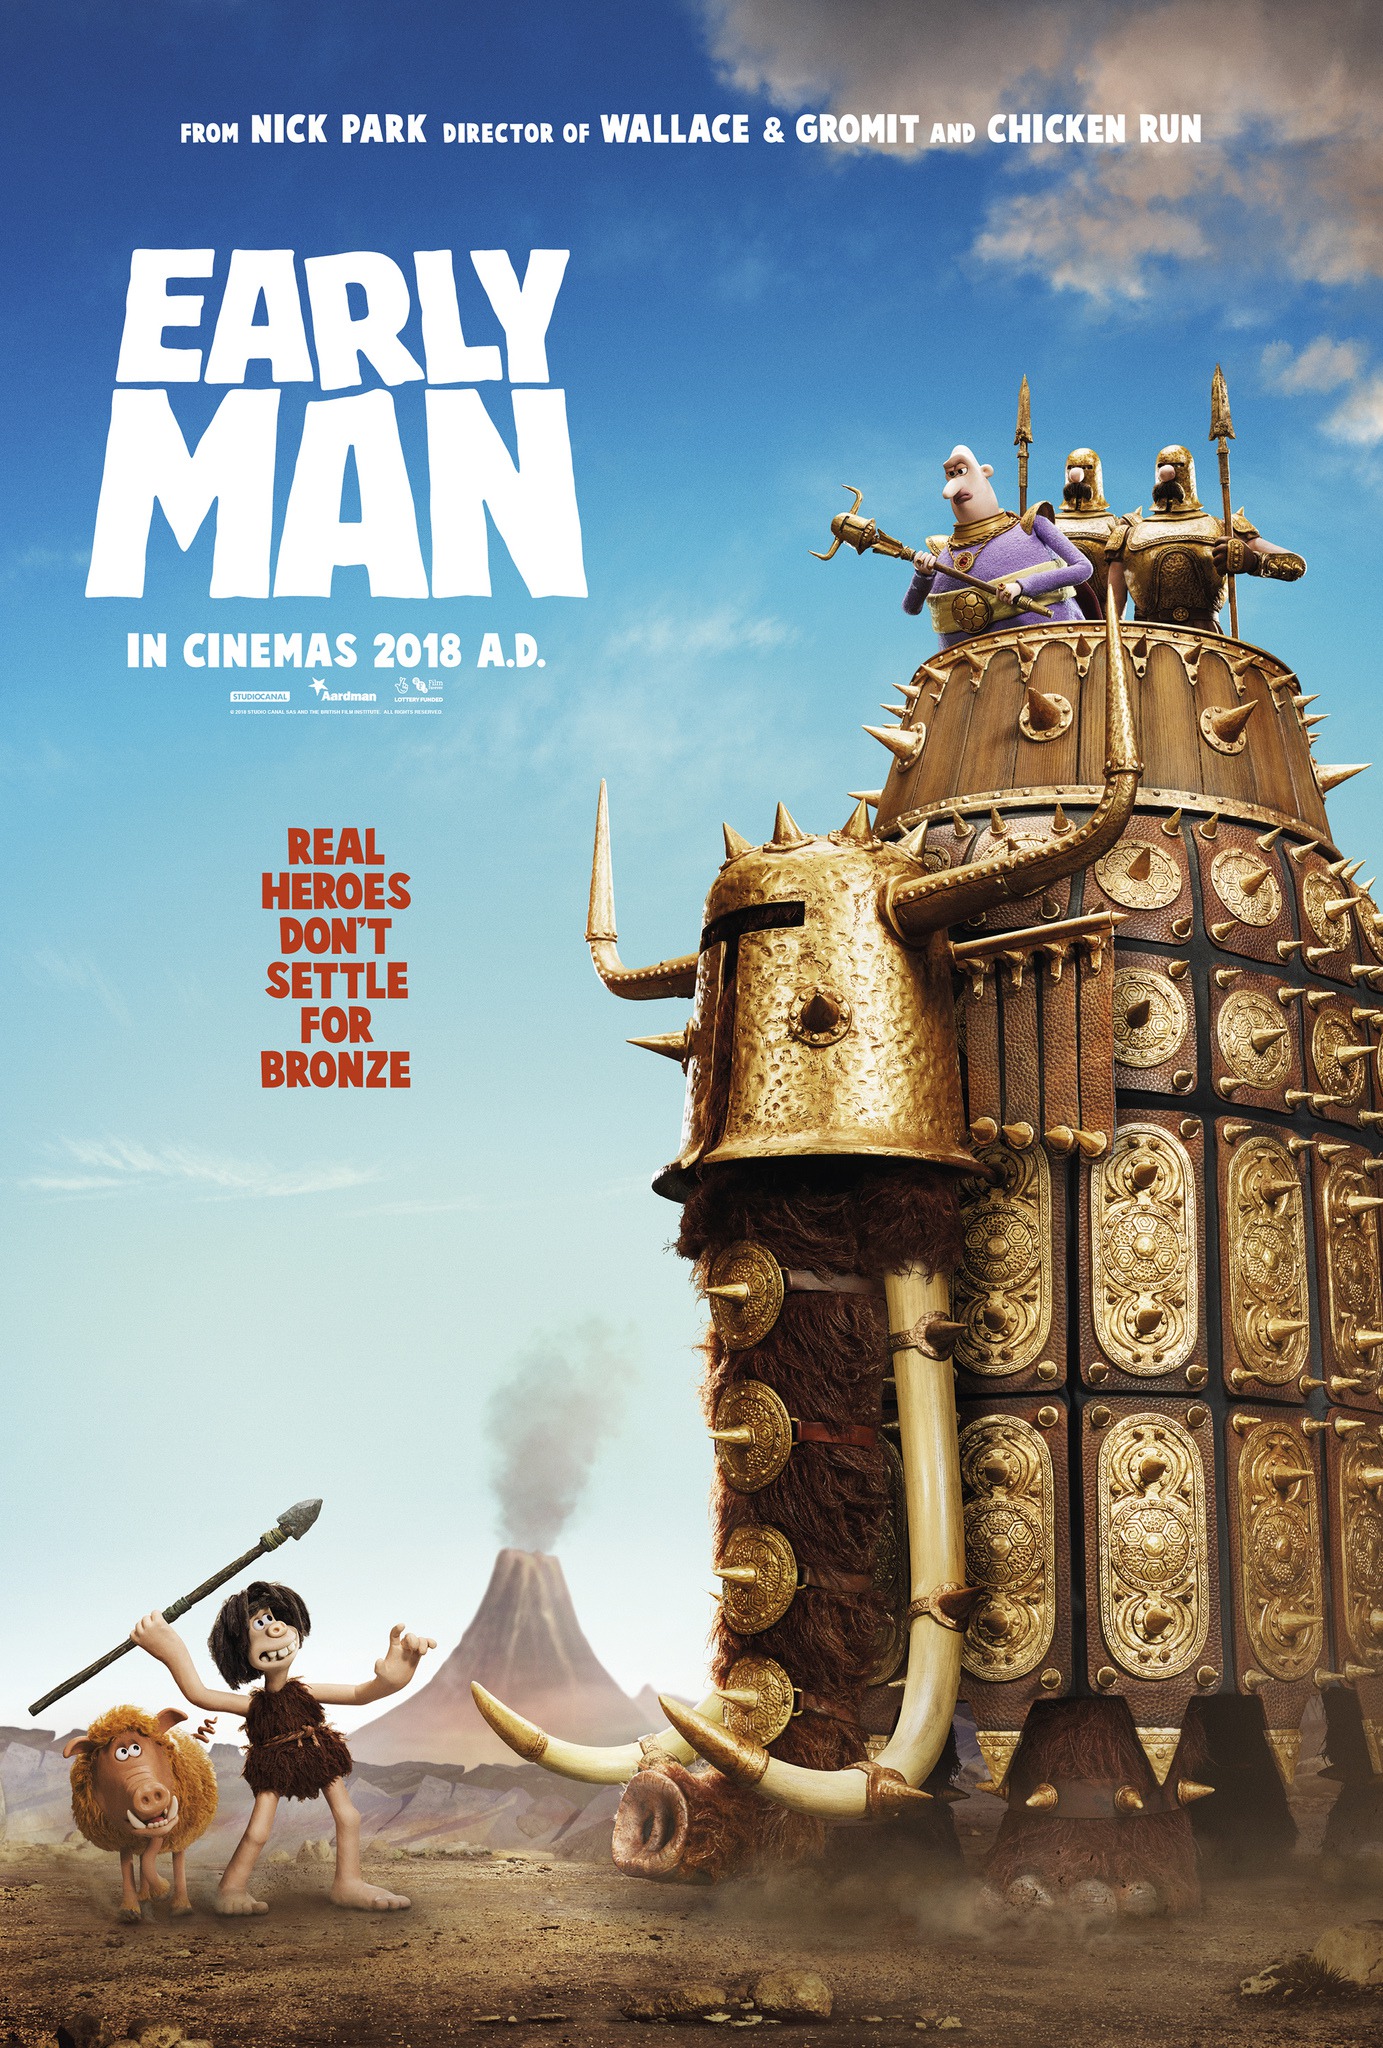 https://static.wikia.nocookie.net/scratchpad/images/8/8f/2018_-_Early_Man_Movie_Poster.jpg/revision/latest?cb=20171221010442